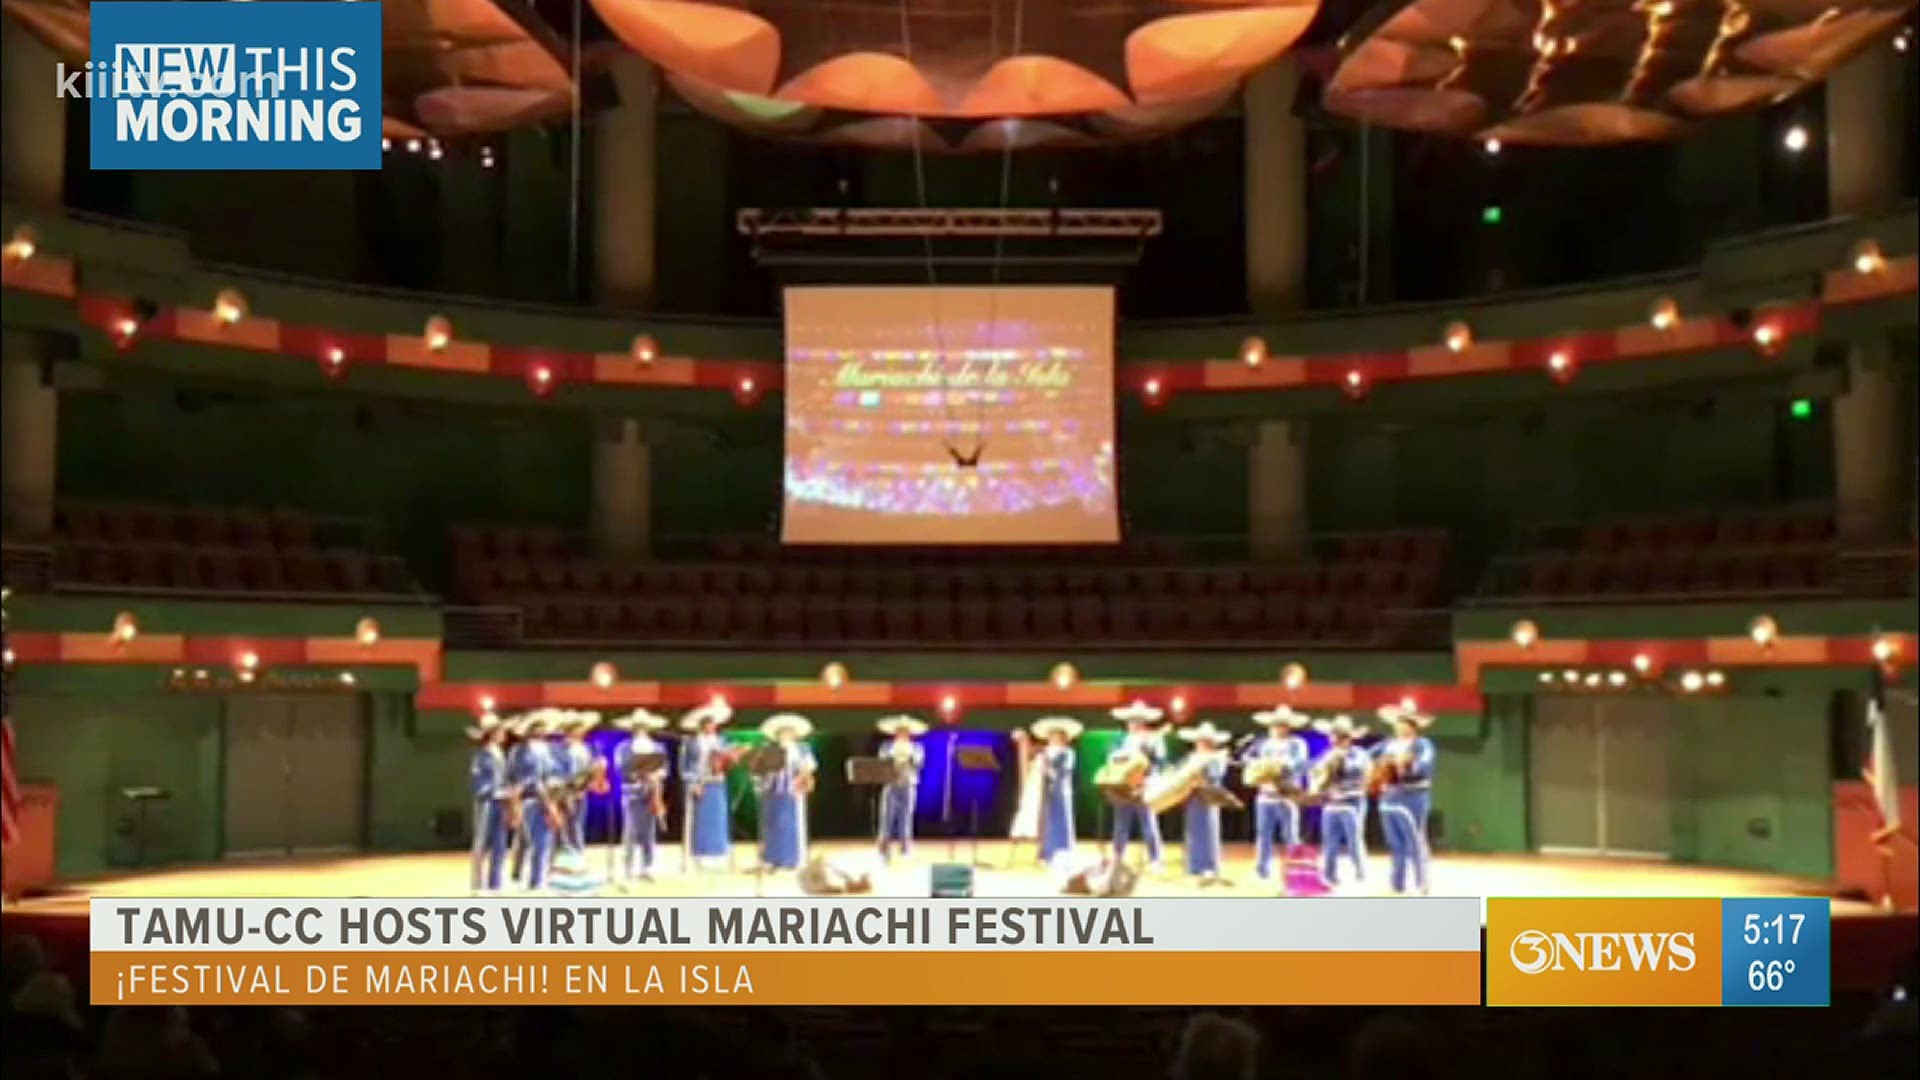 After a challenging year of the pandemic, the island university's mariachi band is back on stage for an annual event.